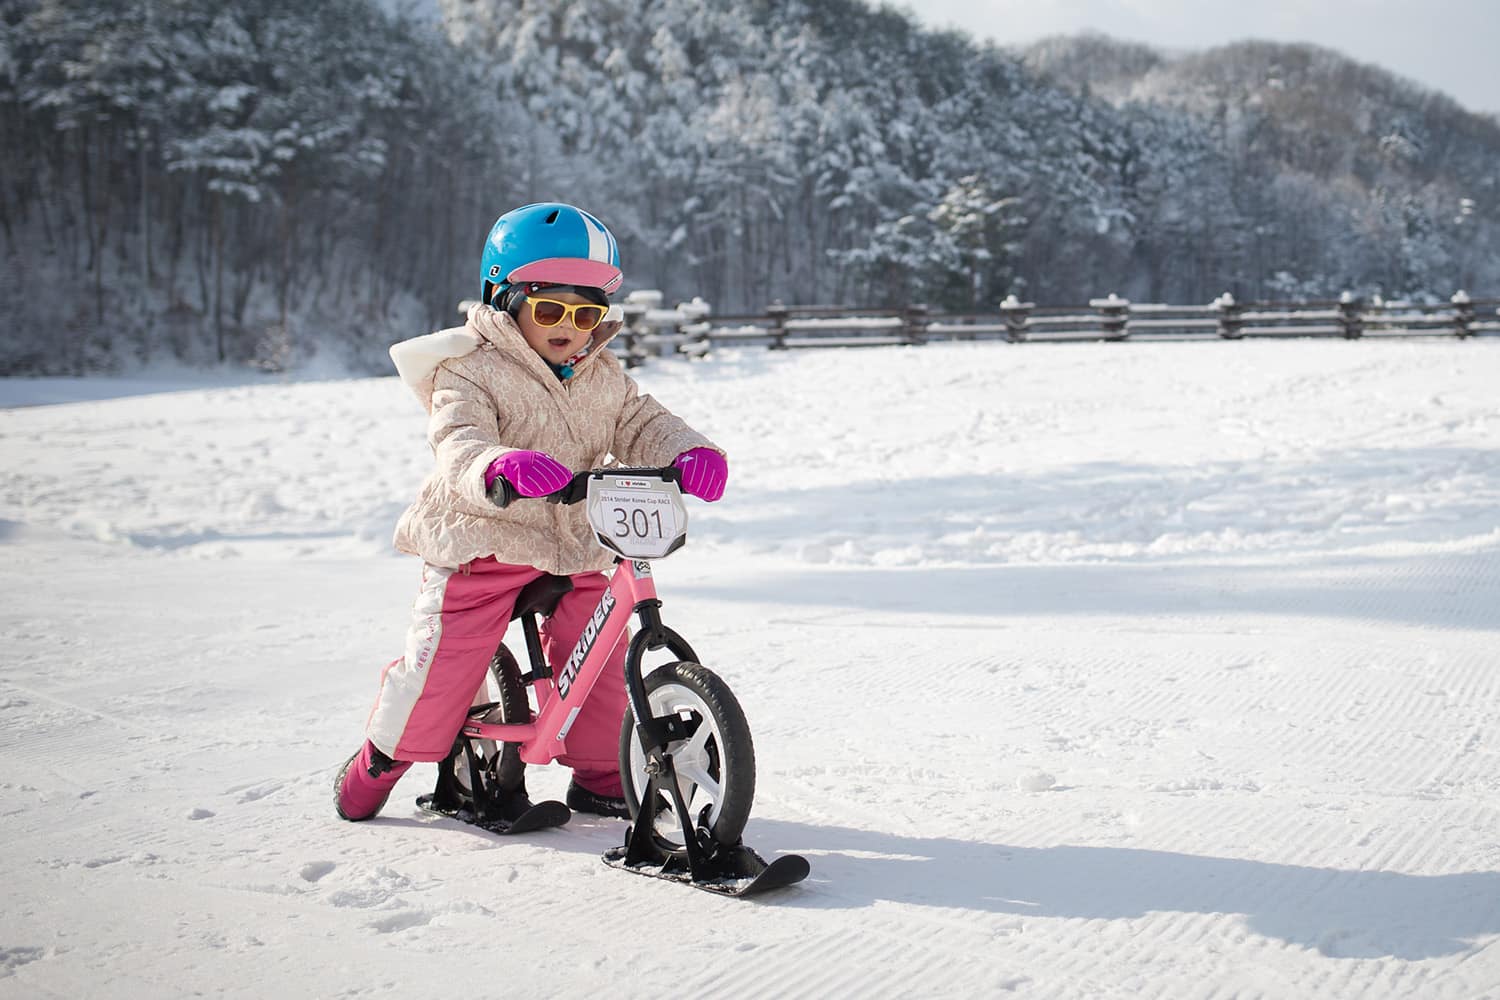 A girl rides a pink Strider bike across a flat, snowy surface